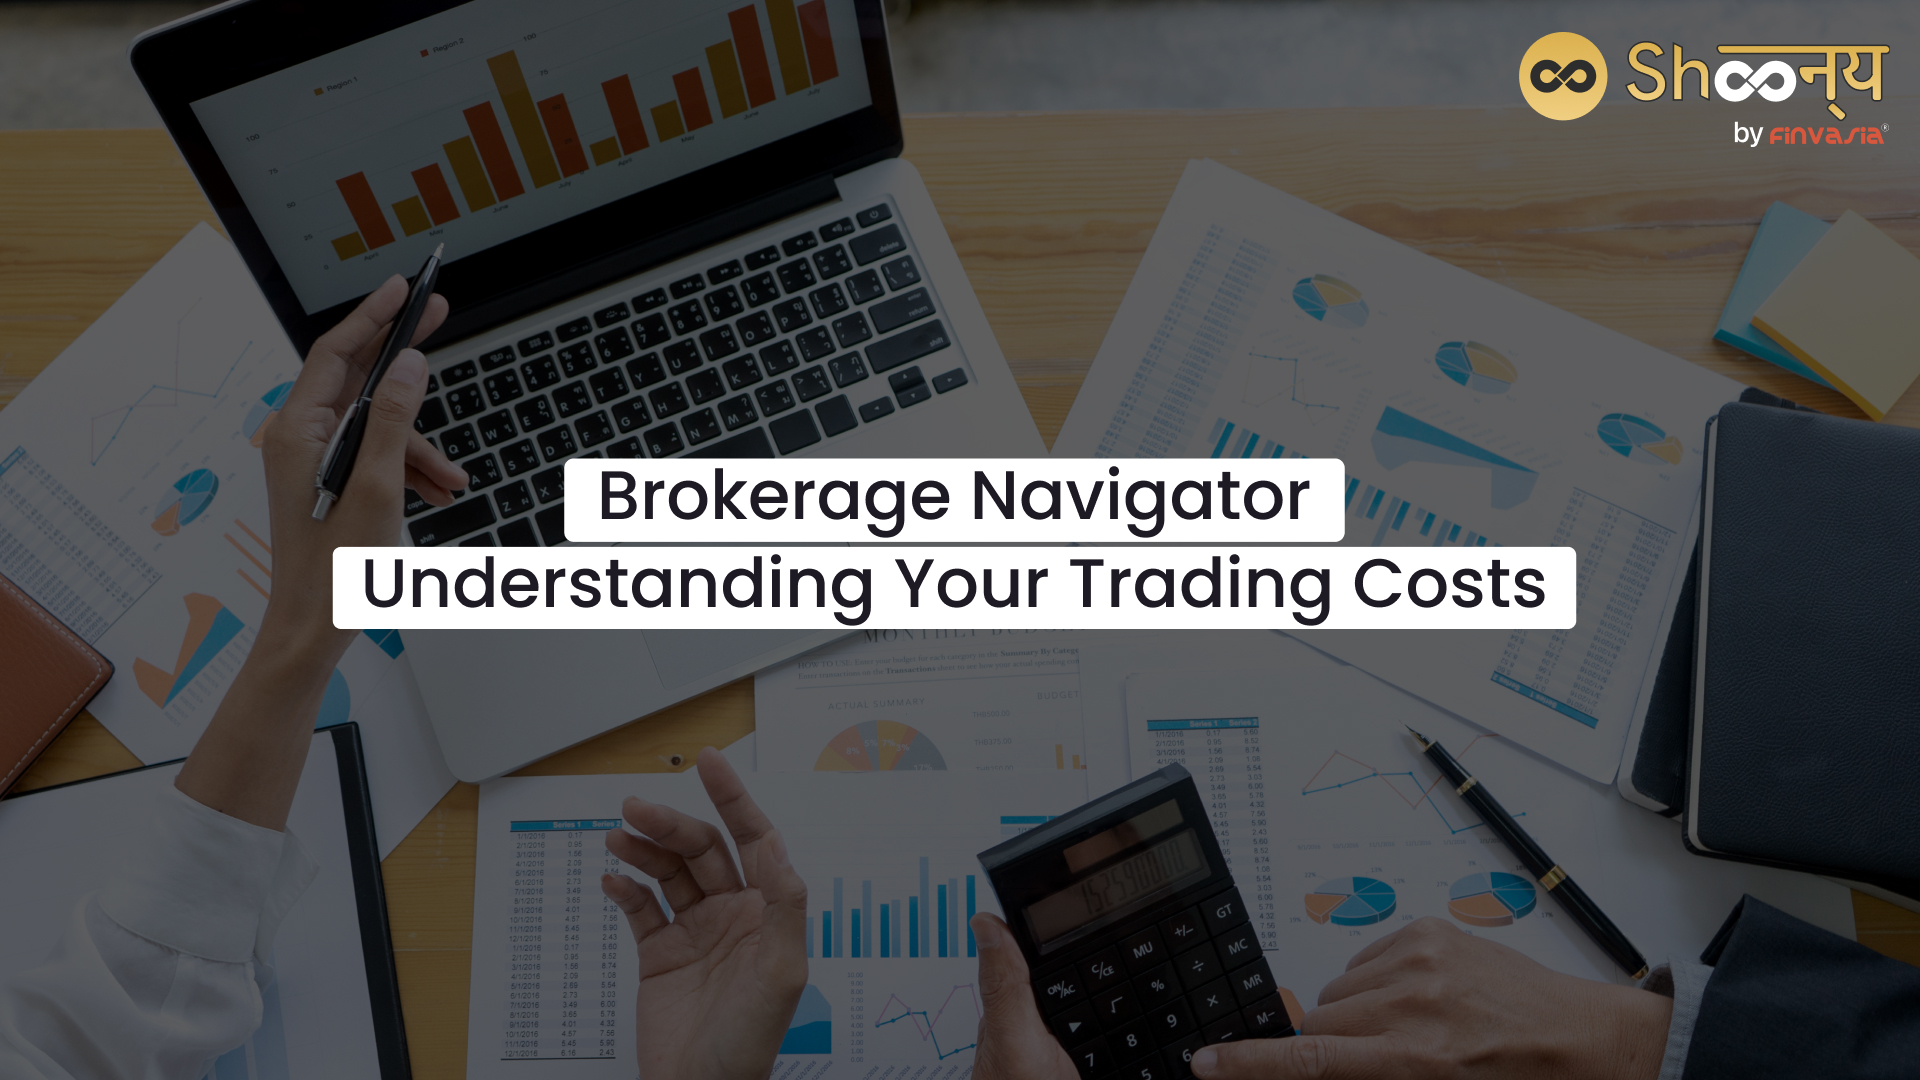 Your Trading Costs with Brokerage Calculator